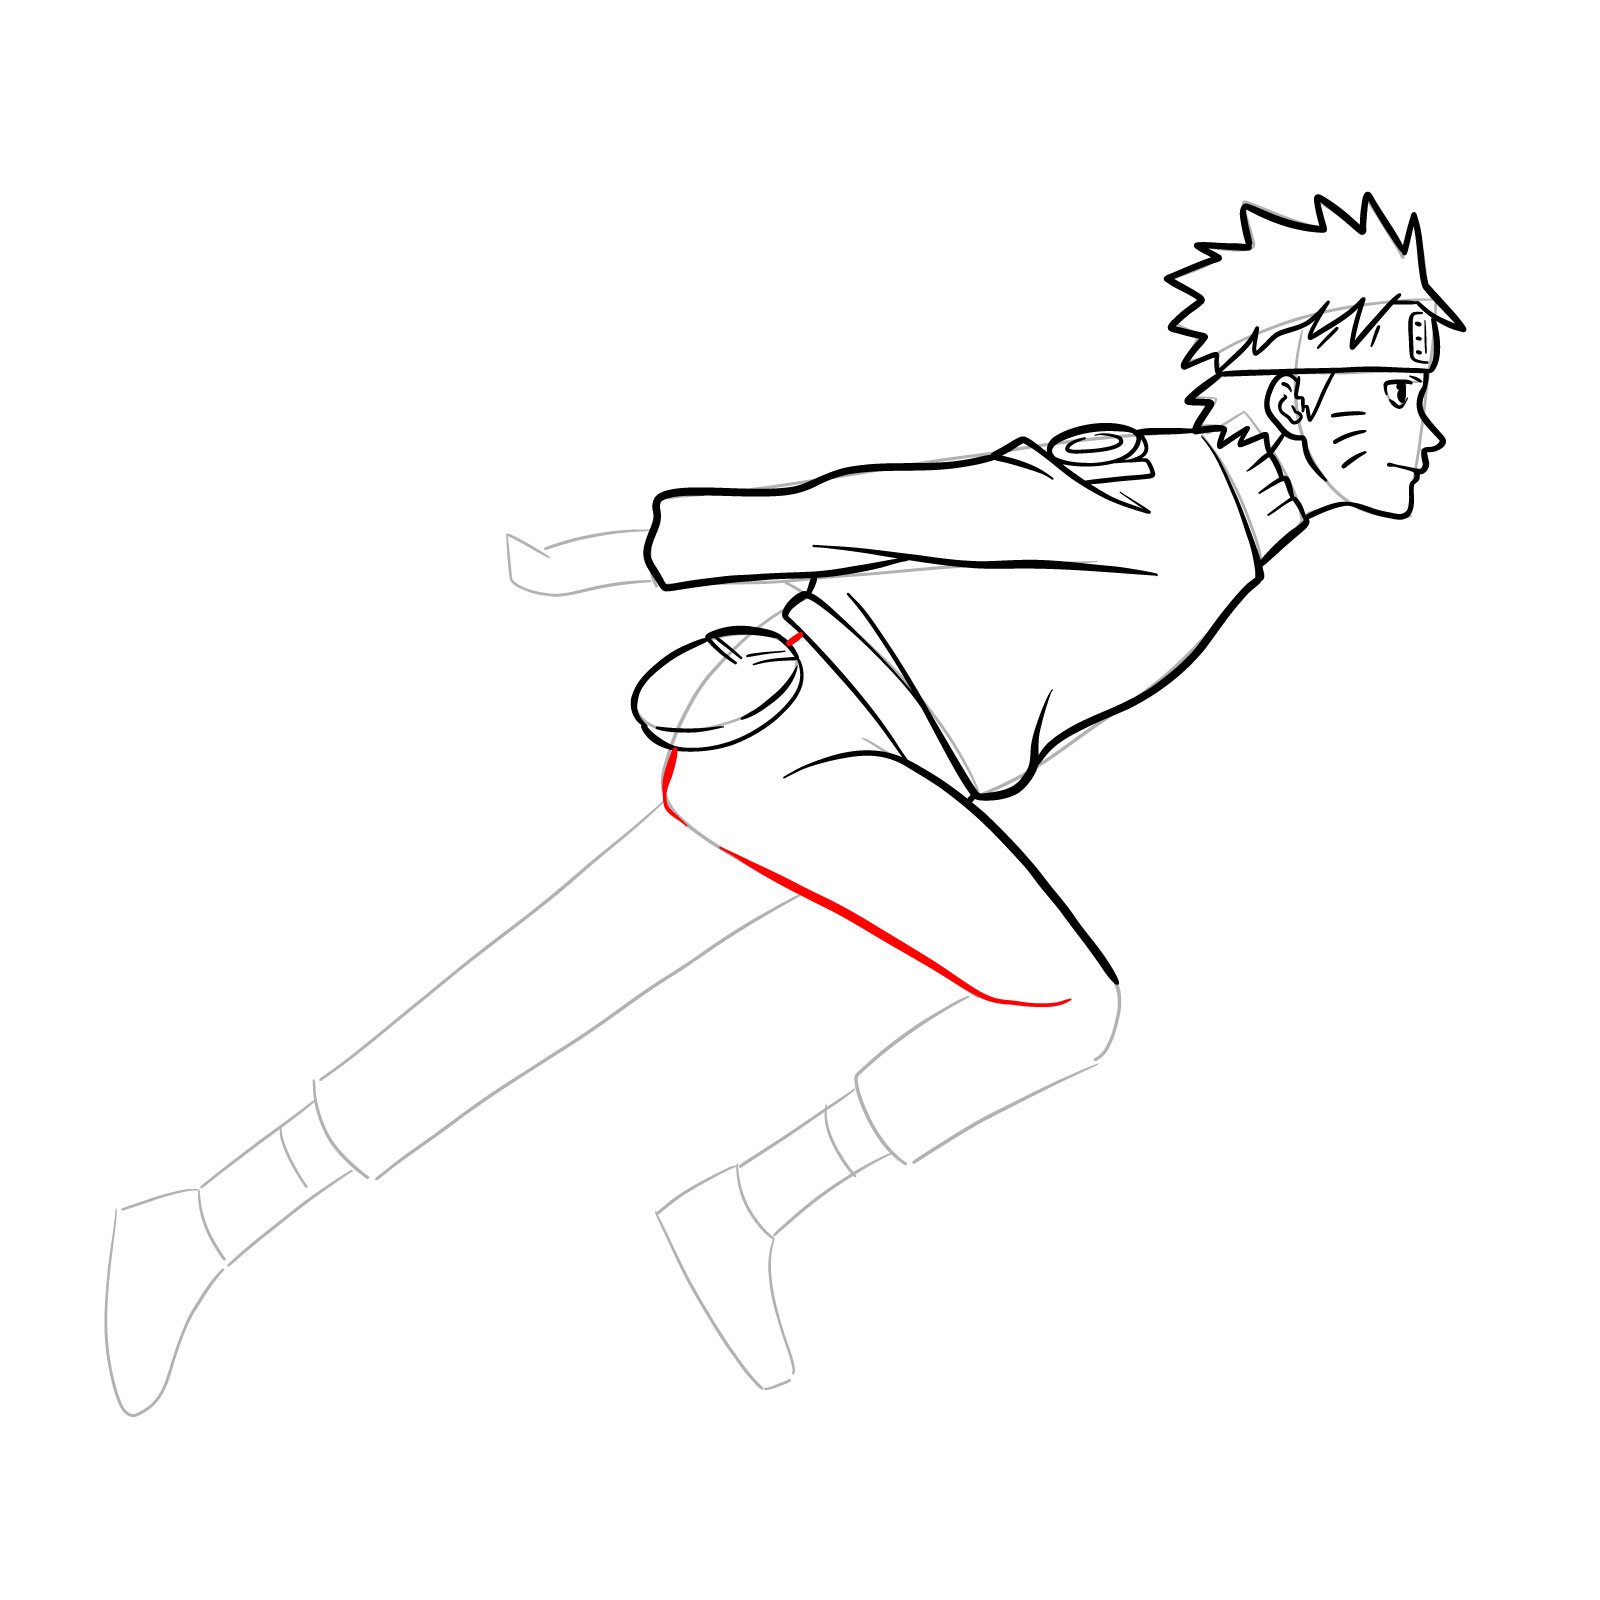 How to draw Naruto running - step 23